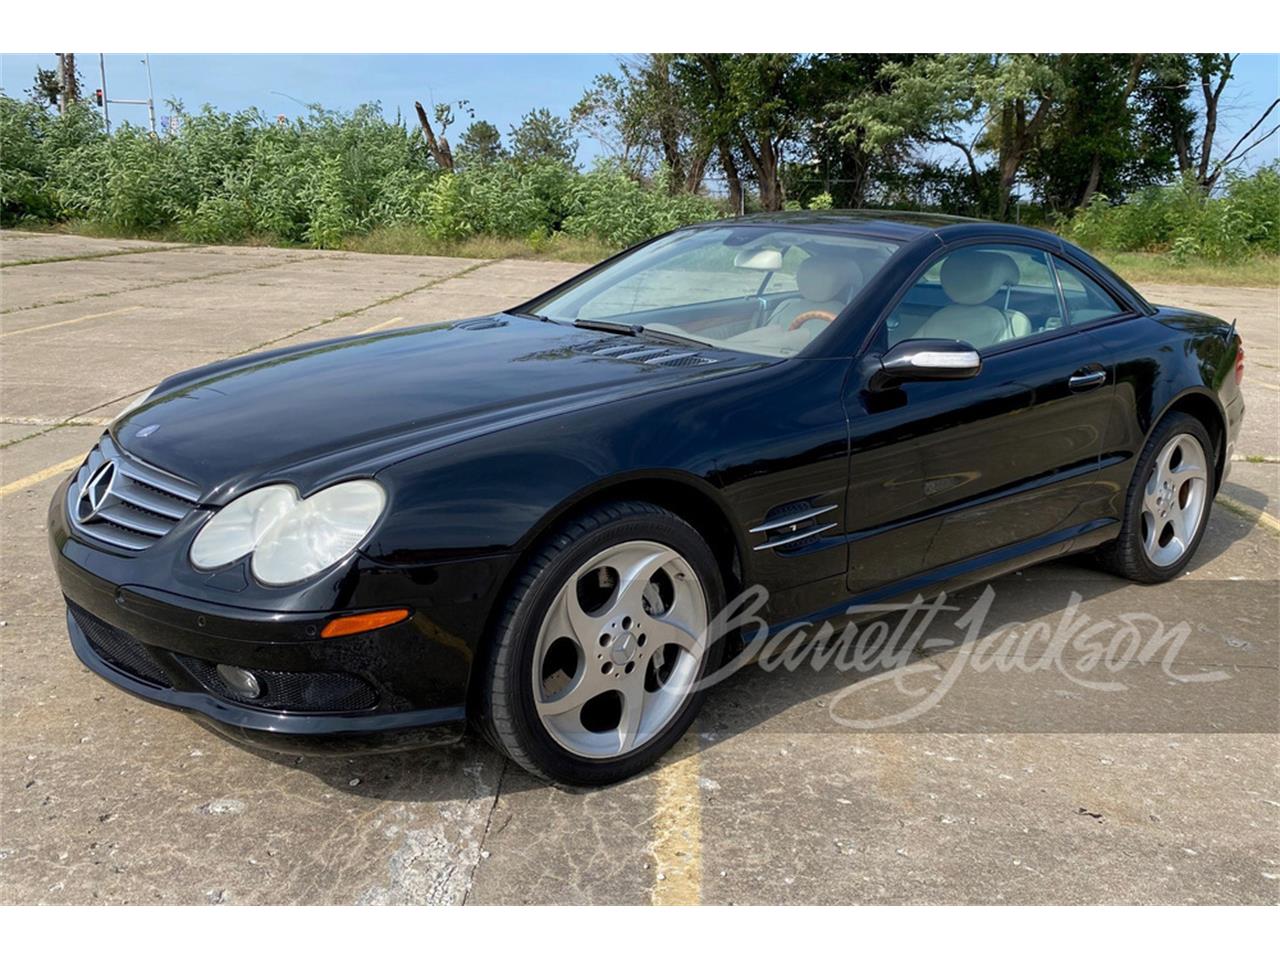 For Sale at Auction: 2005 Mercedes-Benz SL600 in Scottsdale, Arizona for sale in Scottsdale, AZ